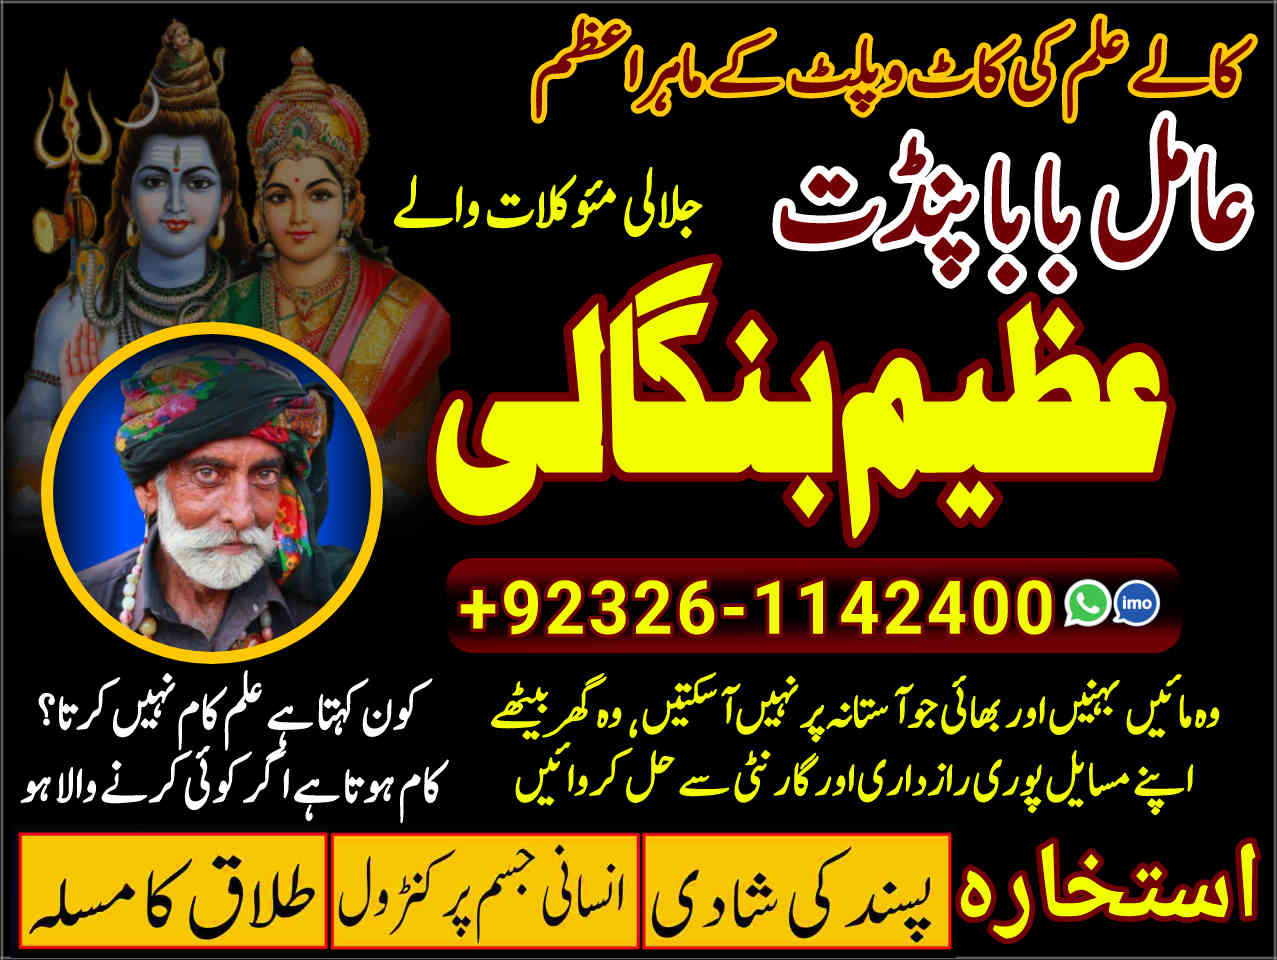 Arthorized-No1 Amil Baba In Pakistan Authentic